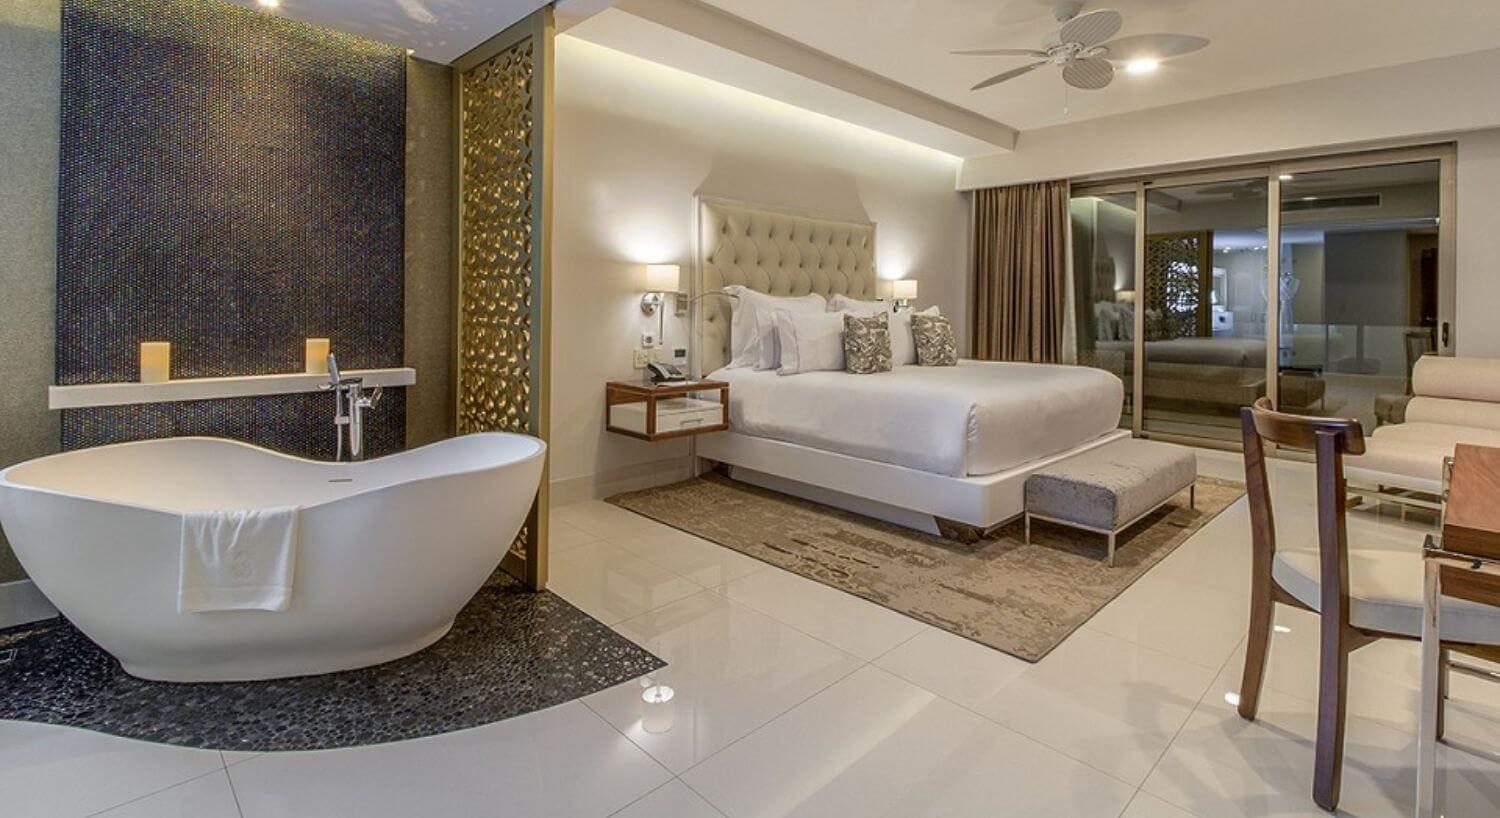 A bedroom with a king bed, nightstands with lamps on either side, a writing desk and lounge chair on the opposite wall, a deep soaking tub, and sliding glass doors that lead out to a private balcony.